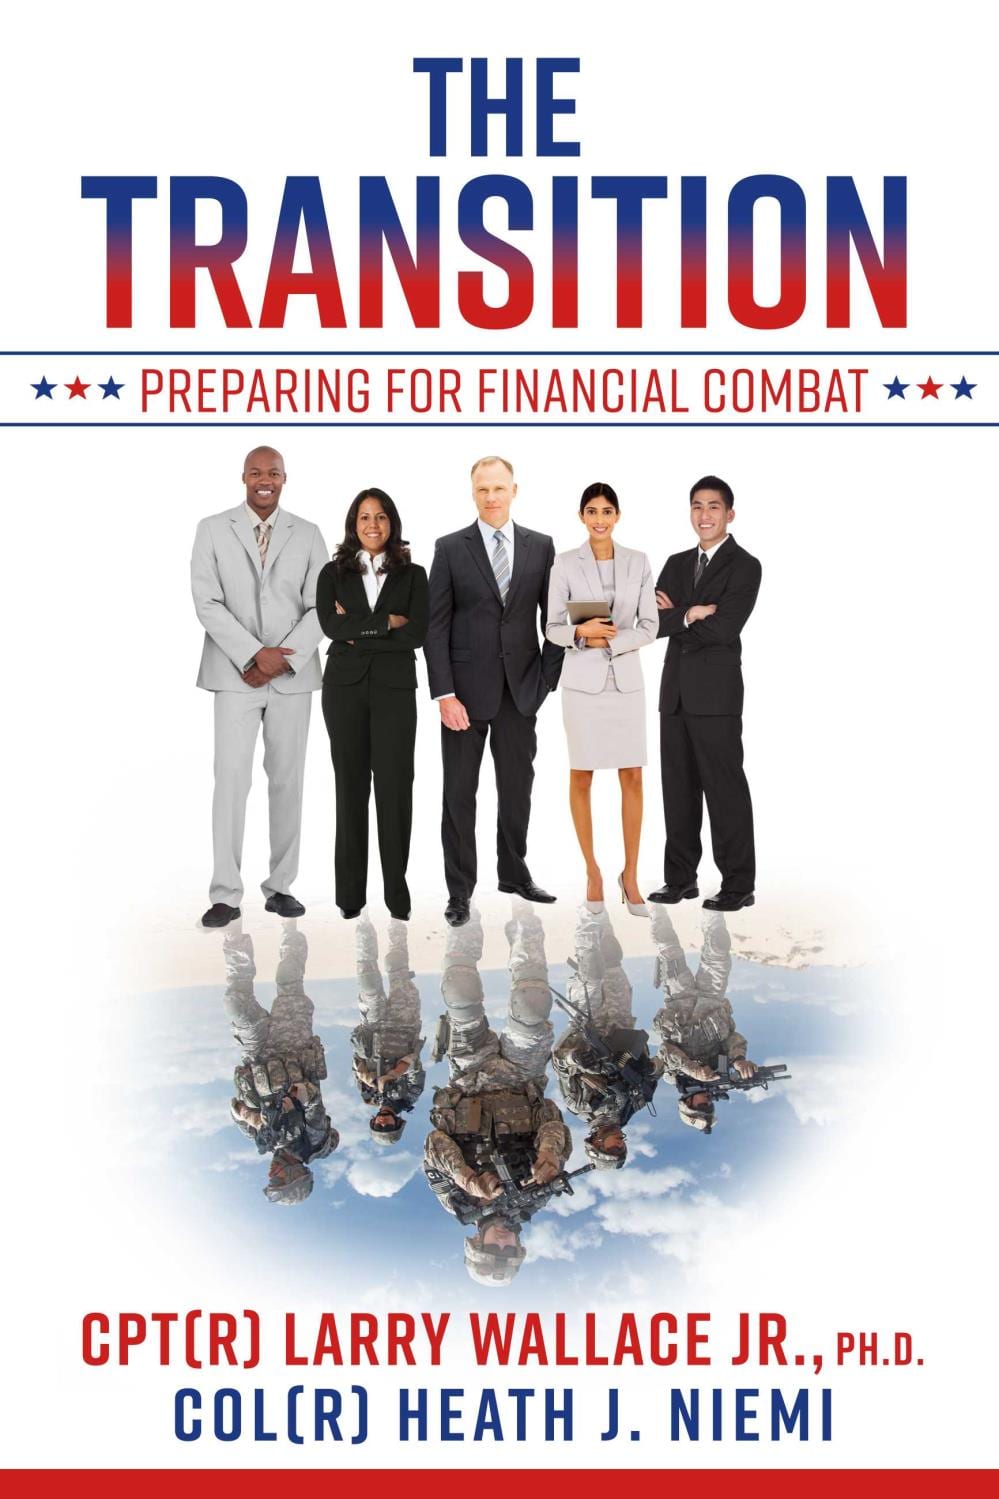 Sharing The Transition: Preparing for Financial Combat